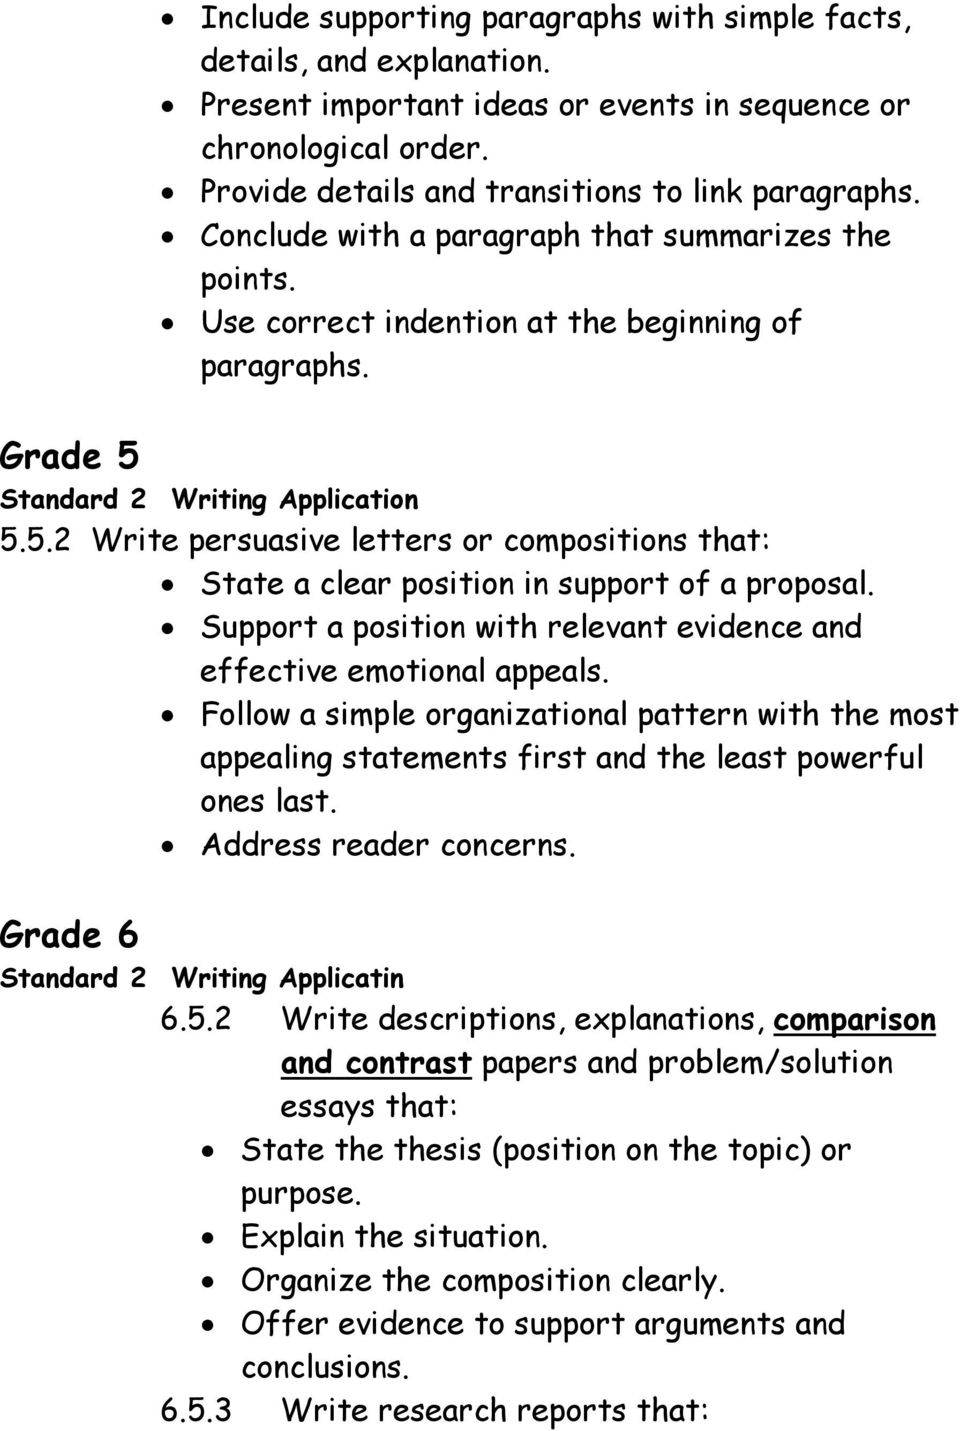 5.5.2 Write persuasive letters or compositions that: State a clear position in support of a proposal. Support a position with relevant evidence and effective emotional appeals.